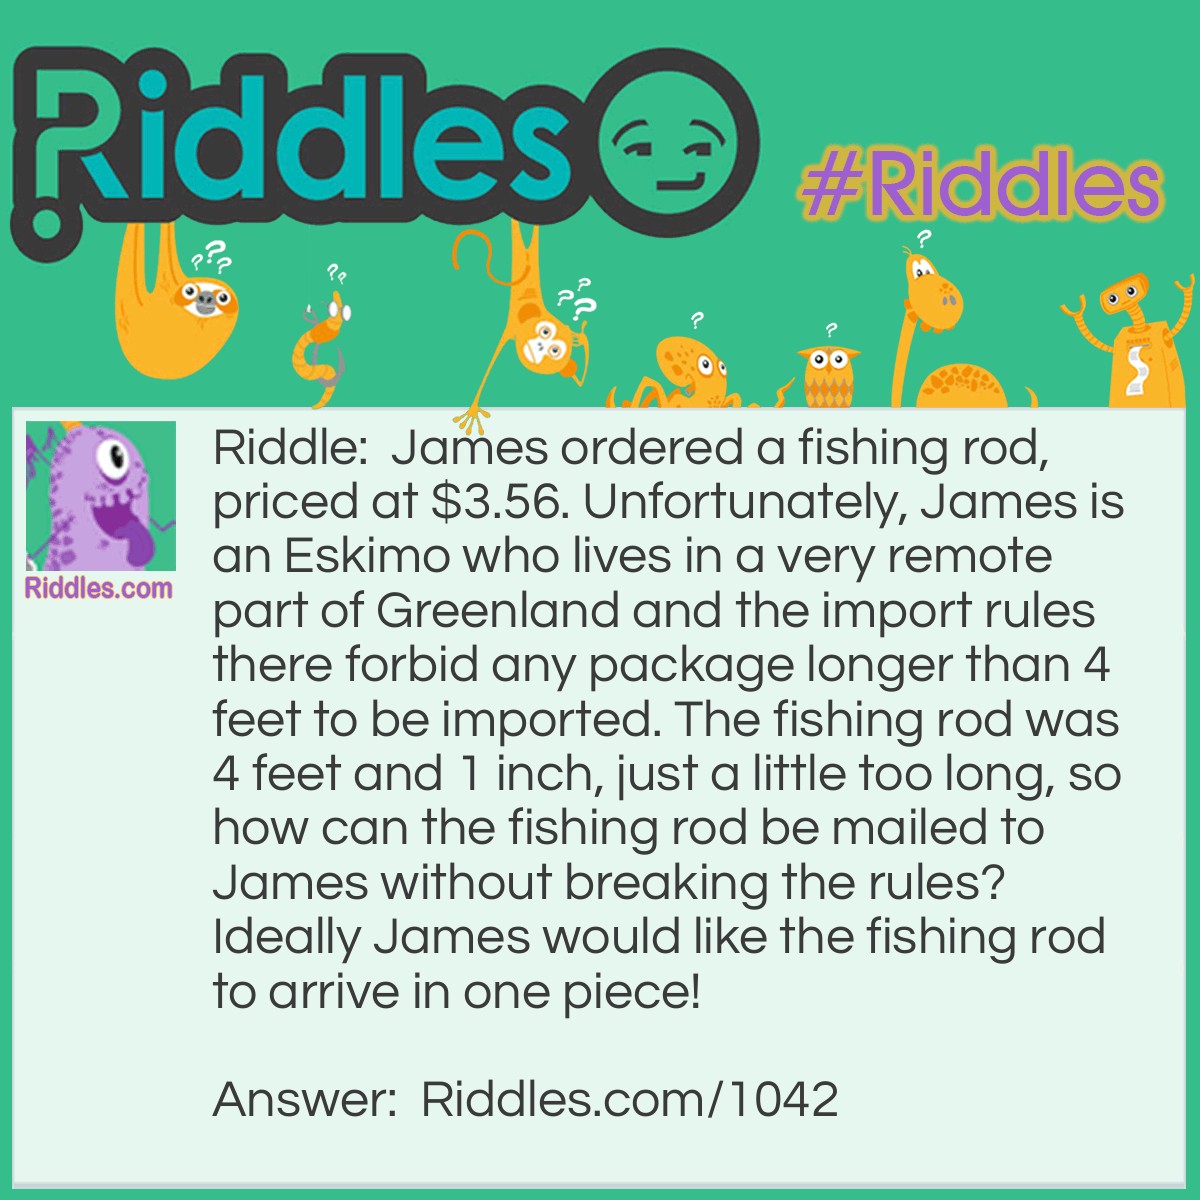 Riddle: James ordered a fishing rod, priced at $3.56. Unfortunately, James is an Eskimo who lives in a very remote part of Greenland and the import rules there forbid any package longer than 4 feet to be imported. The fishing rod was 4 feet and 1 inch, just a little too long, so how can the fishing rod be mailed to James without breaking the rules? Ideally James would like the fishing rod to arrive in one piece! Answer: Insert the fishing rod into a box which measures 4 feet on all sides, the fishing rod will fit within the diagonal of the box with room to spare. 